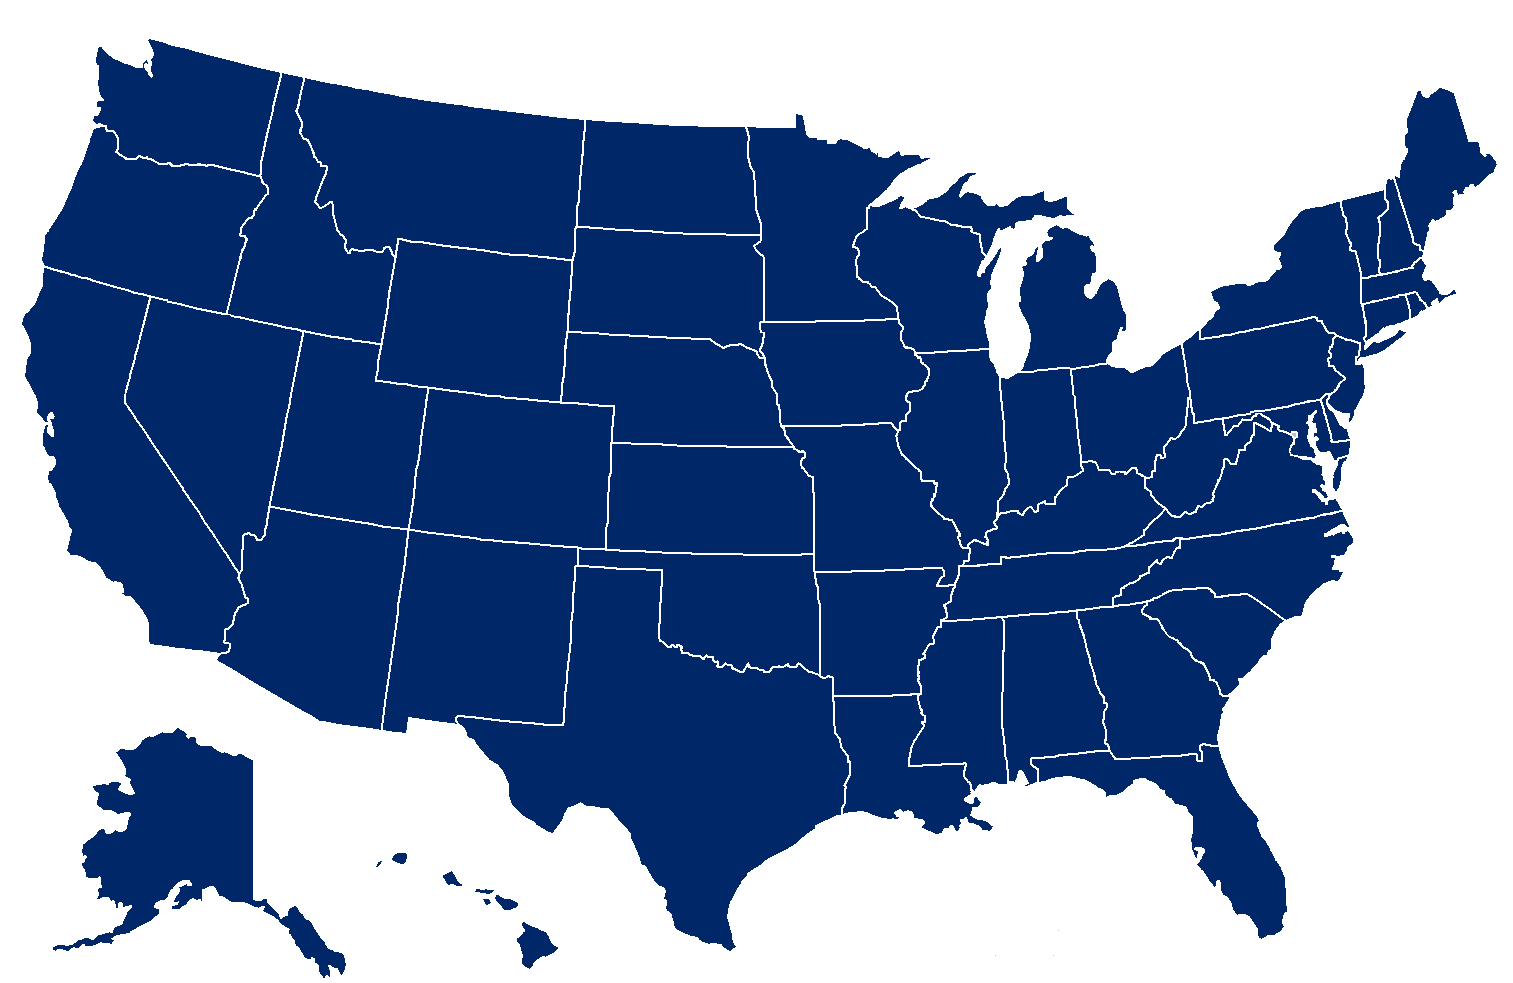 A map of the all 50 states in United States all colored in dark blue, signifying a universal accessibility requirement throughout the nation